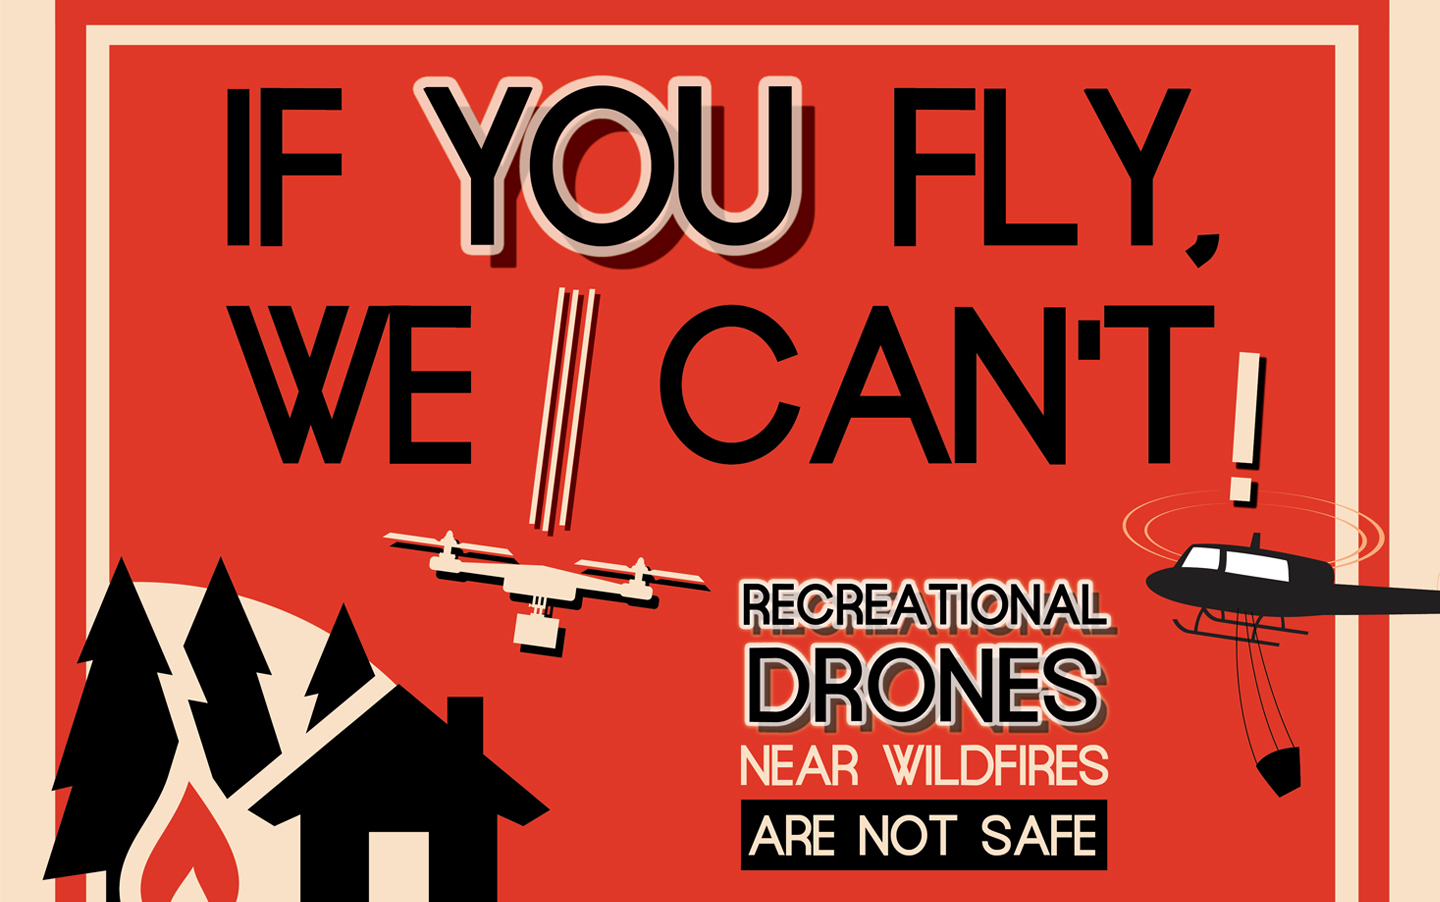 If you fly, we can't graphic